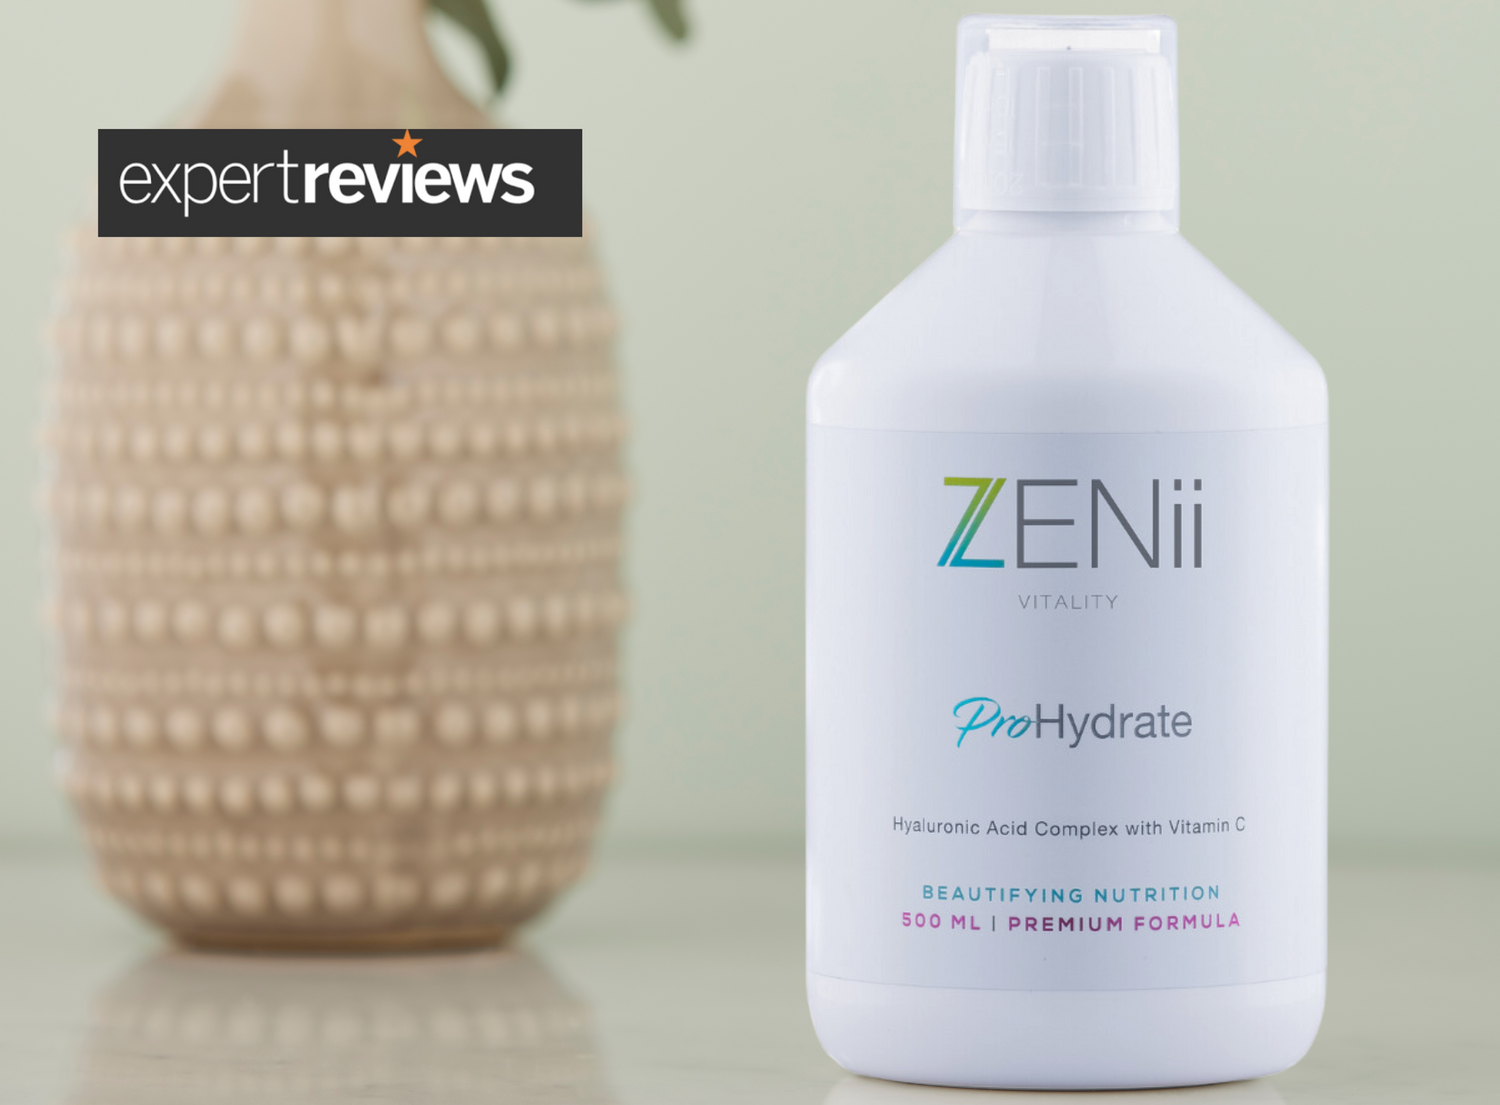 ProHydrate - Featured in Expert Reviews